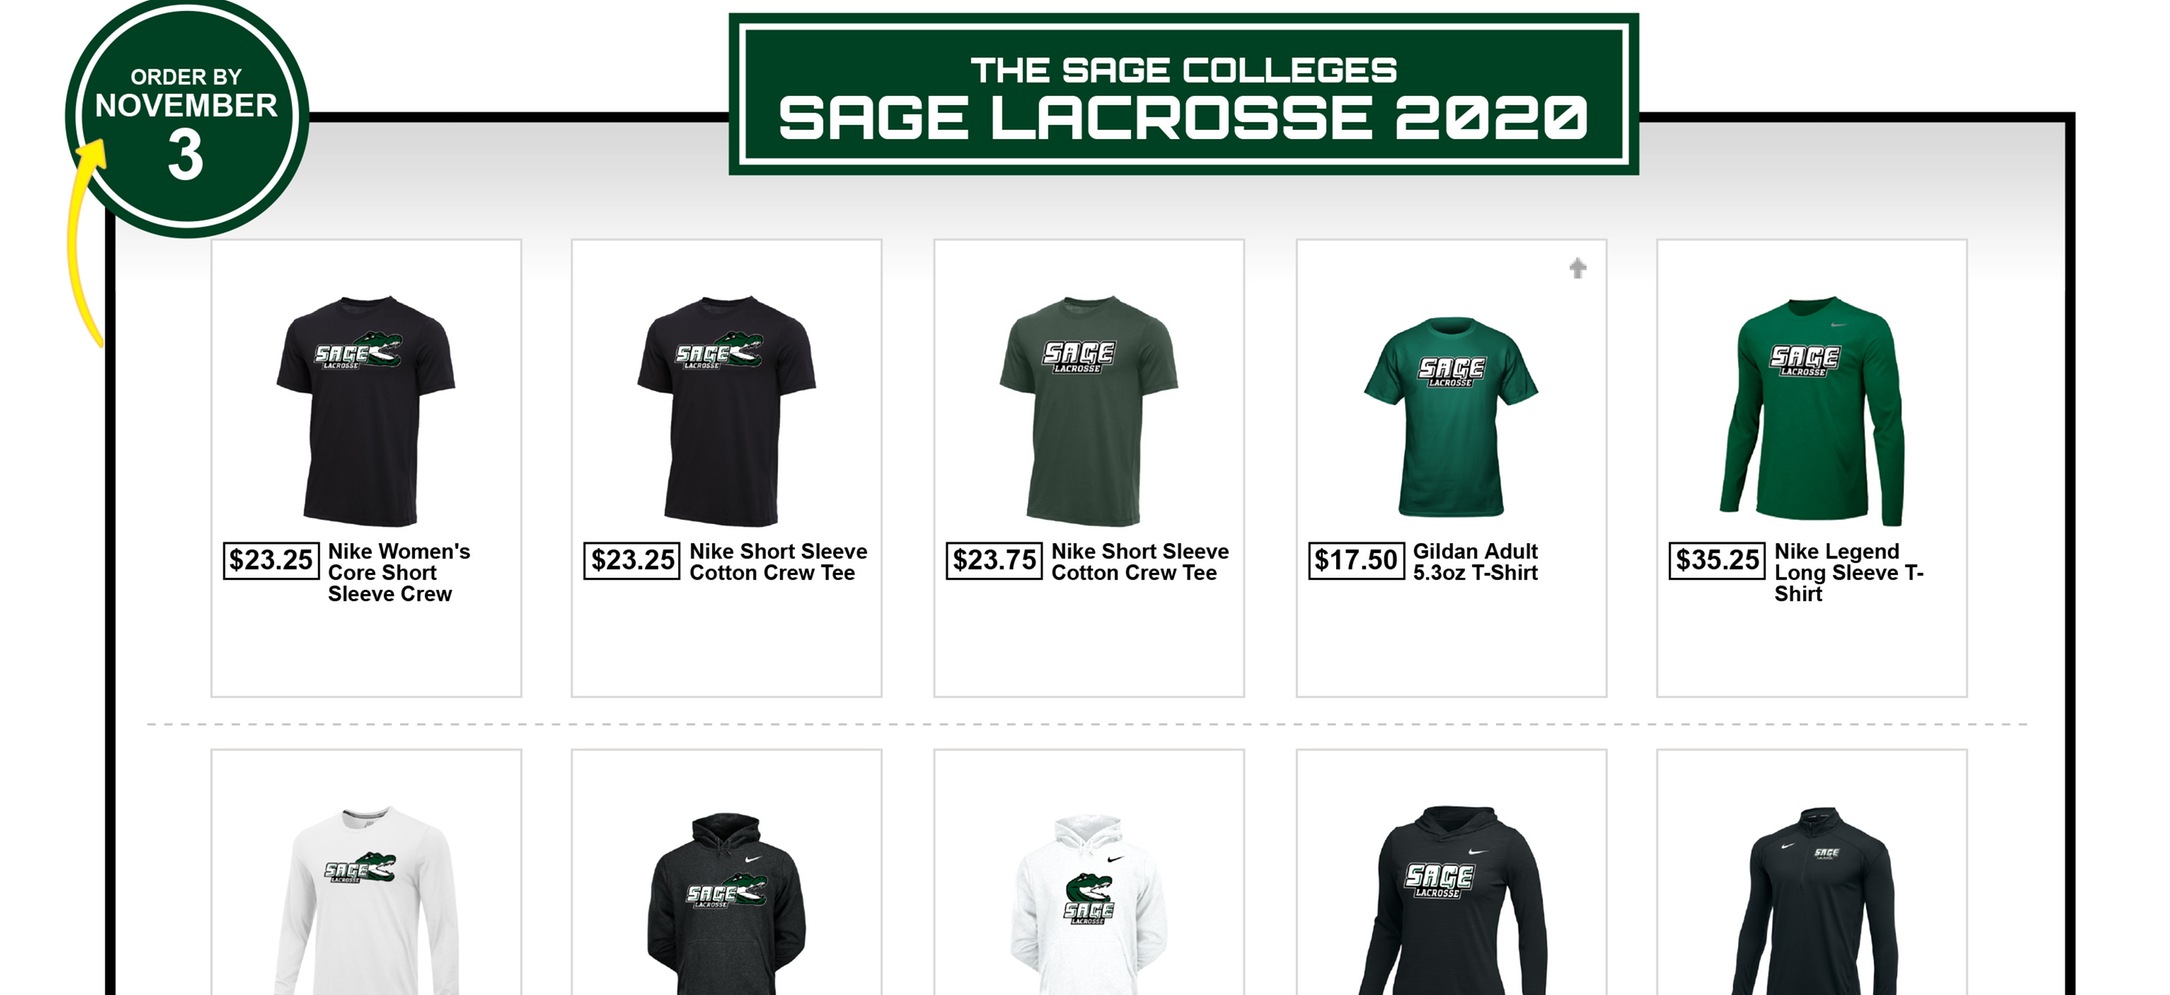 Support Sage Women's Lacrosse Team with a Purchase from their Team Store! Now through Nov. 3!